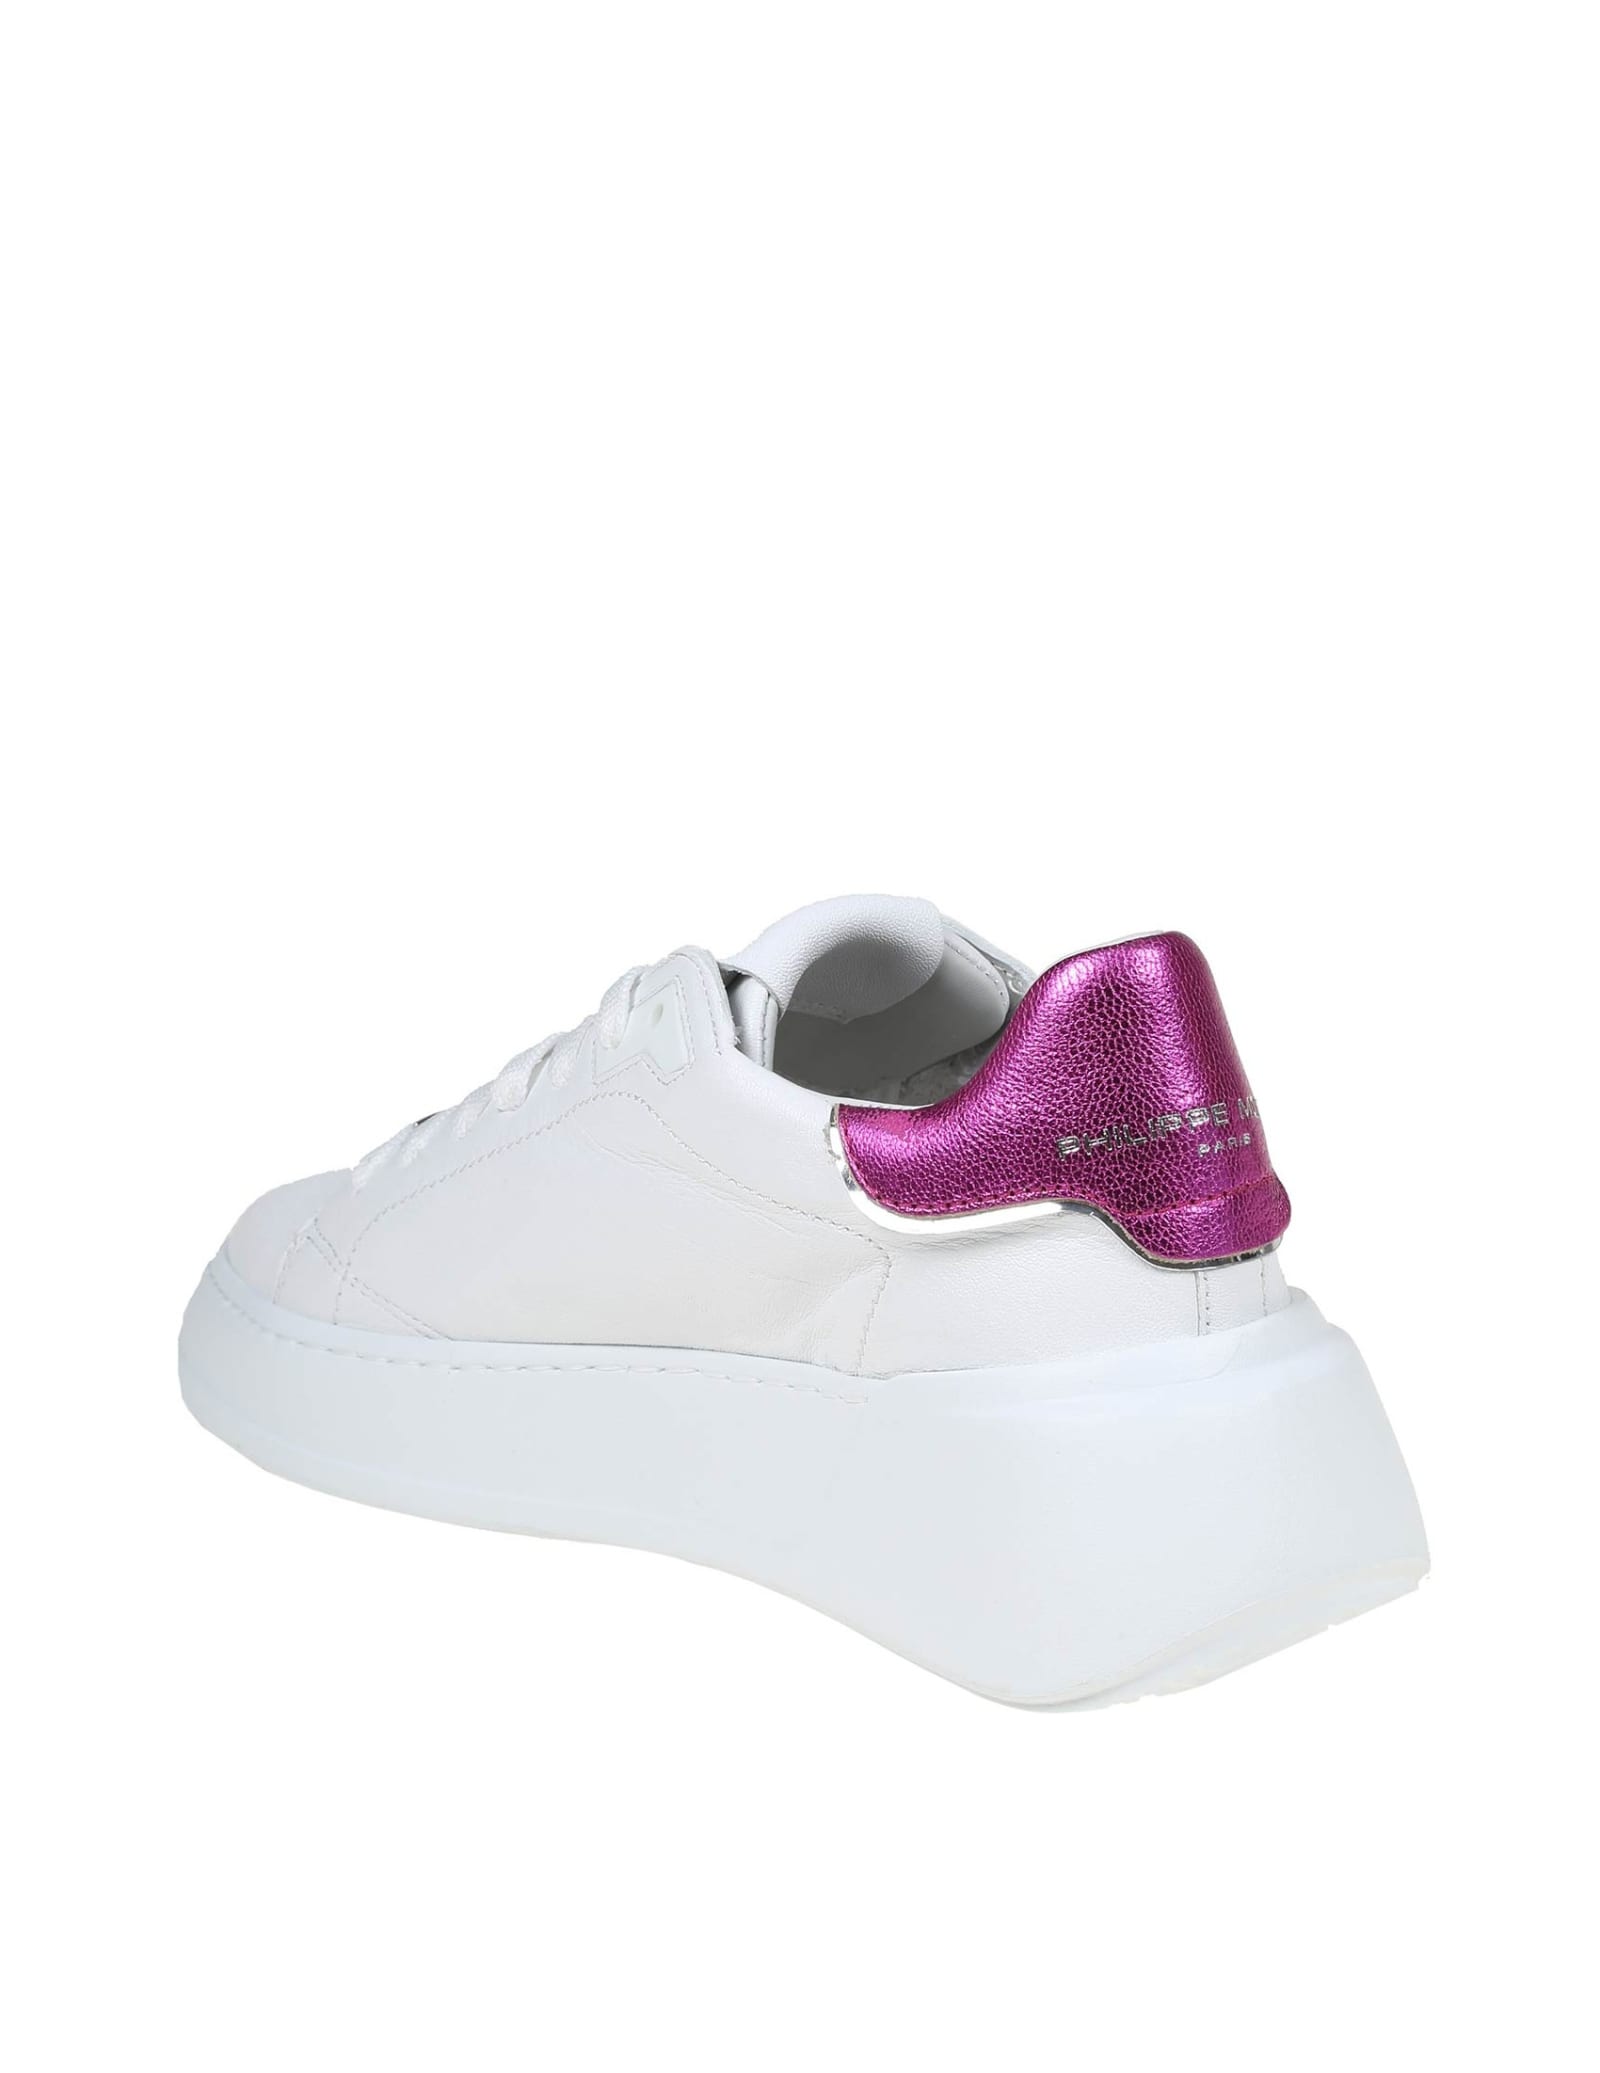 Shop Philippe Model Tres Temple Low In White And Fuchsia Color Leather In Blanc/fucsia